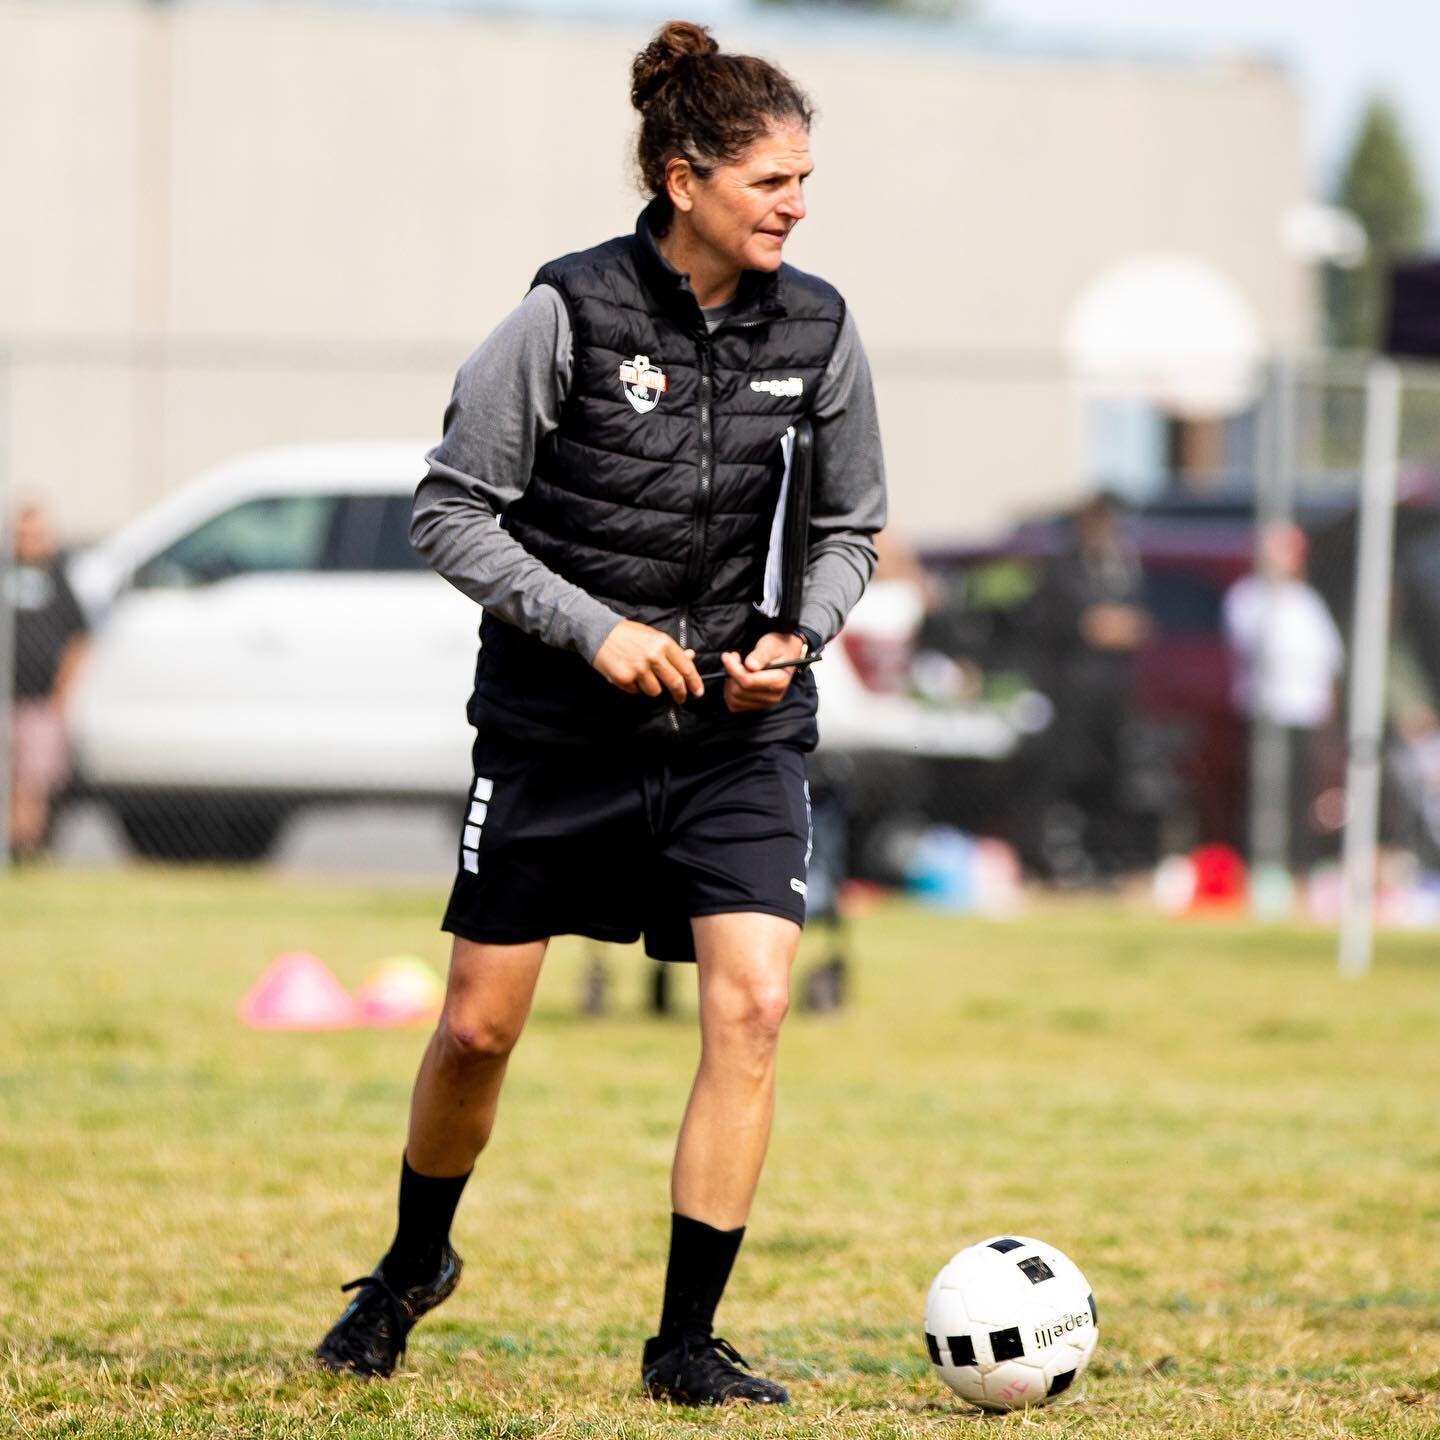 &ldquo;Tryouts have been wonderful! It&rsquo;s a time where we have an opportunity to meet and welcome new Napa United families as well as welcome back our returning families. I am excited to see our 2023/2024 teams come together.&rdquo; - @19kshaw, 